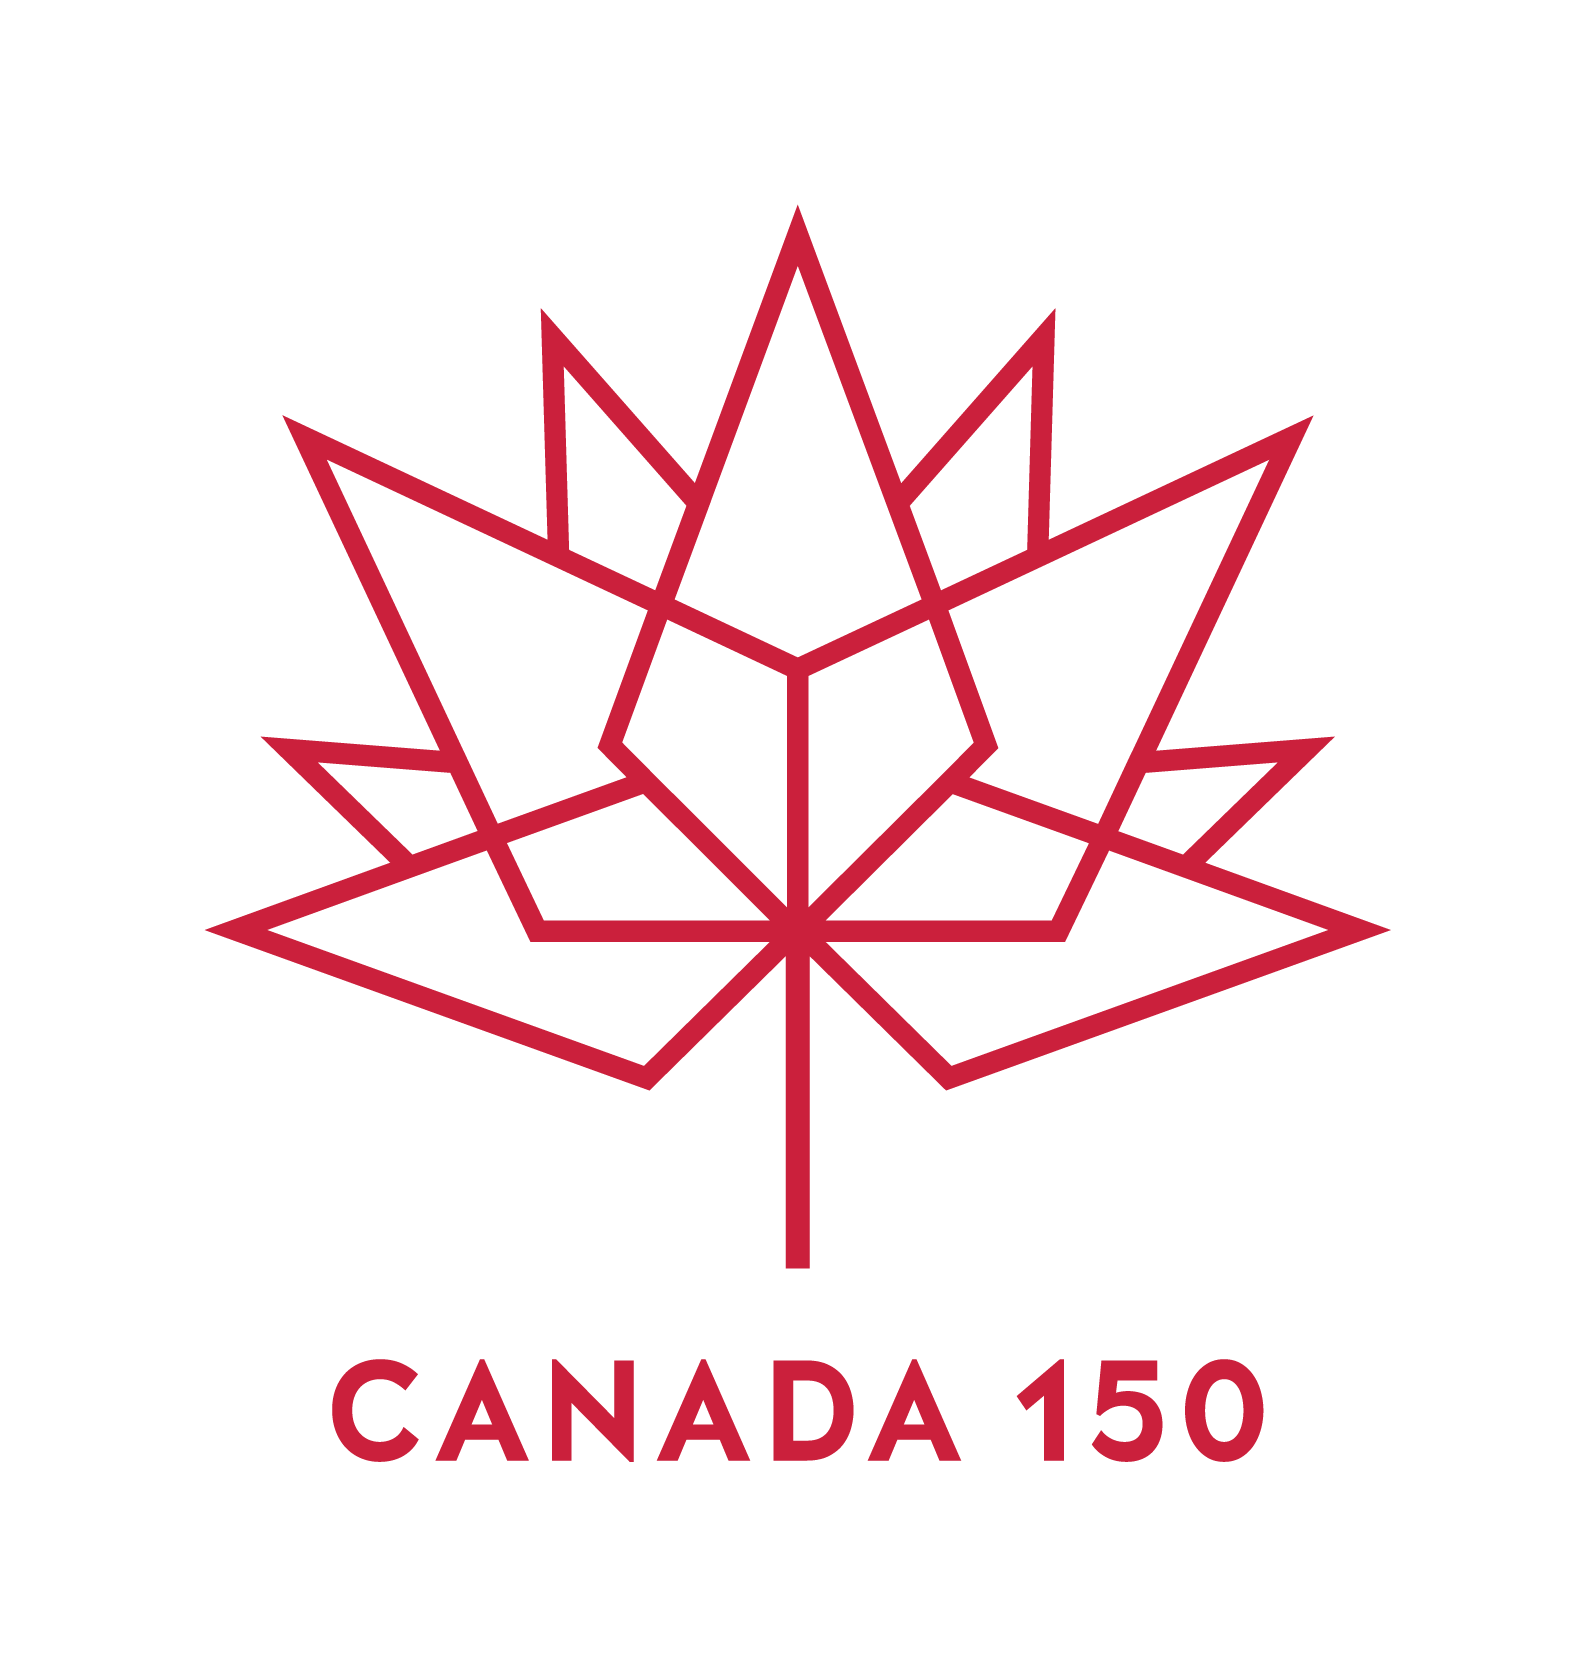 20170726 - Canada150.png